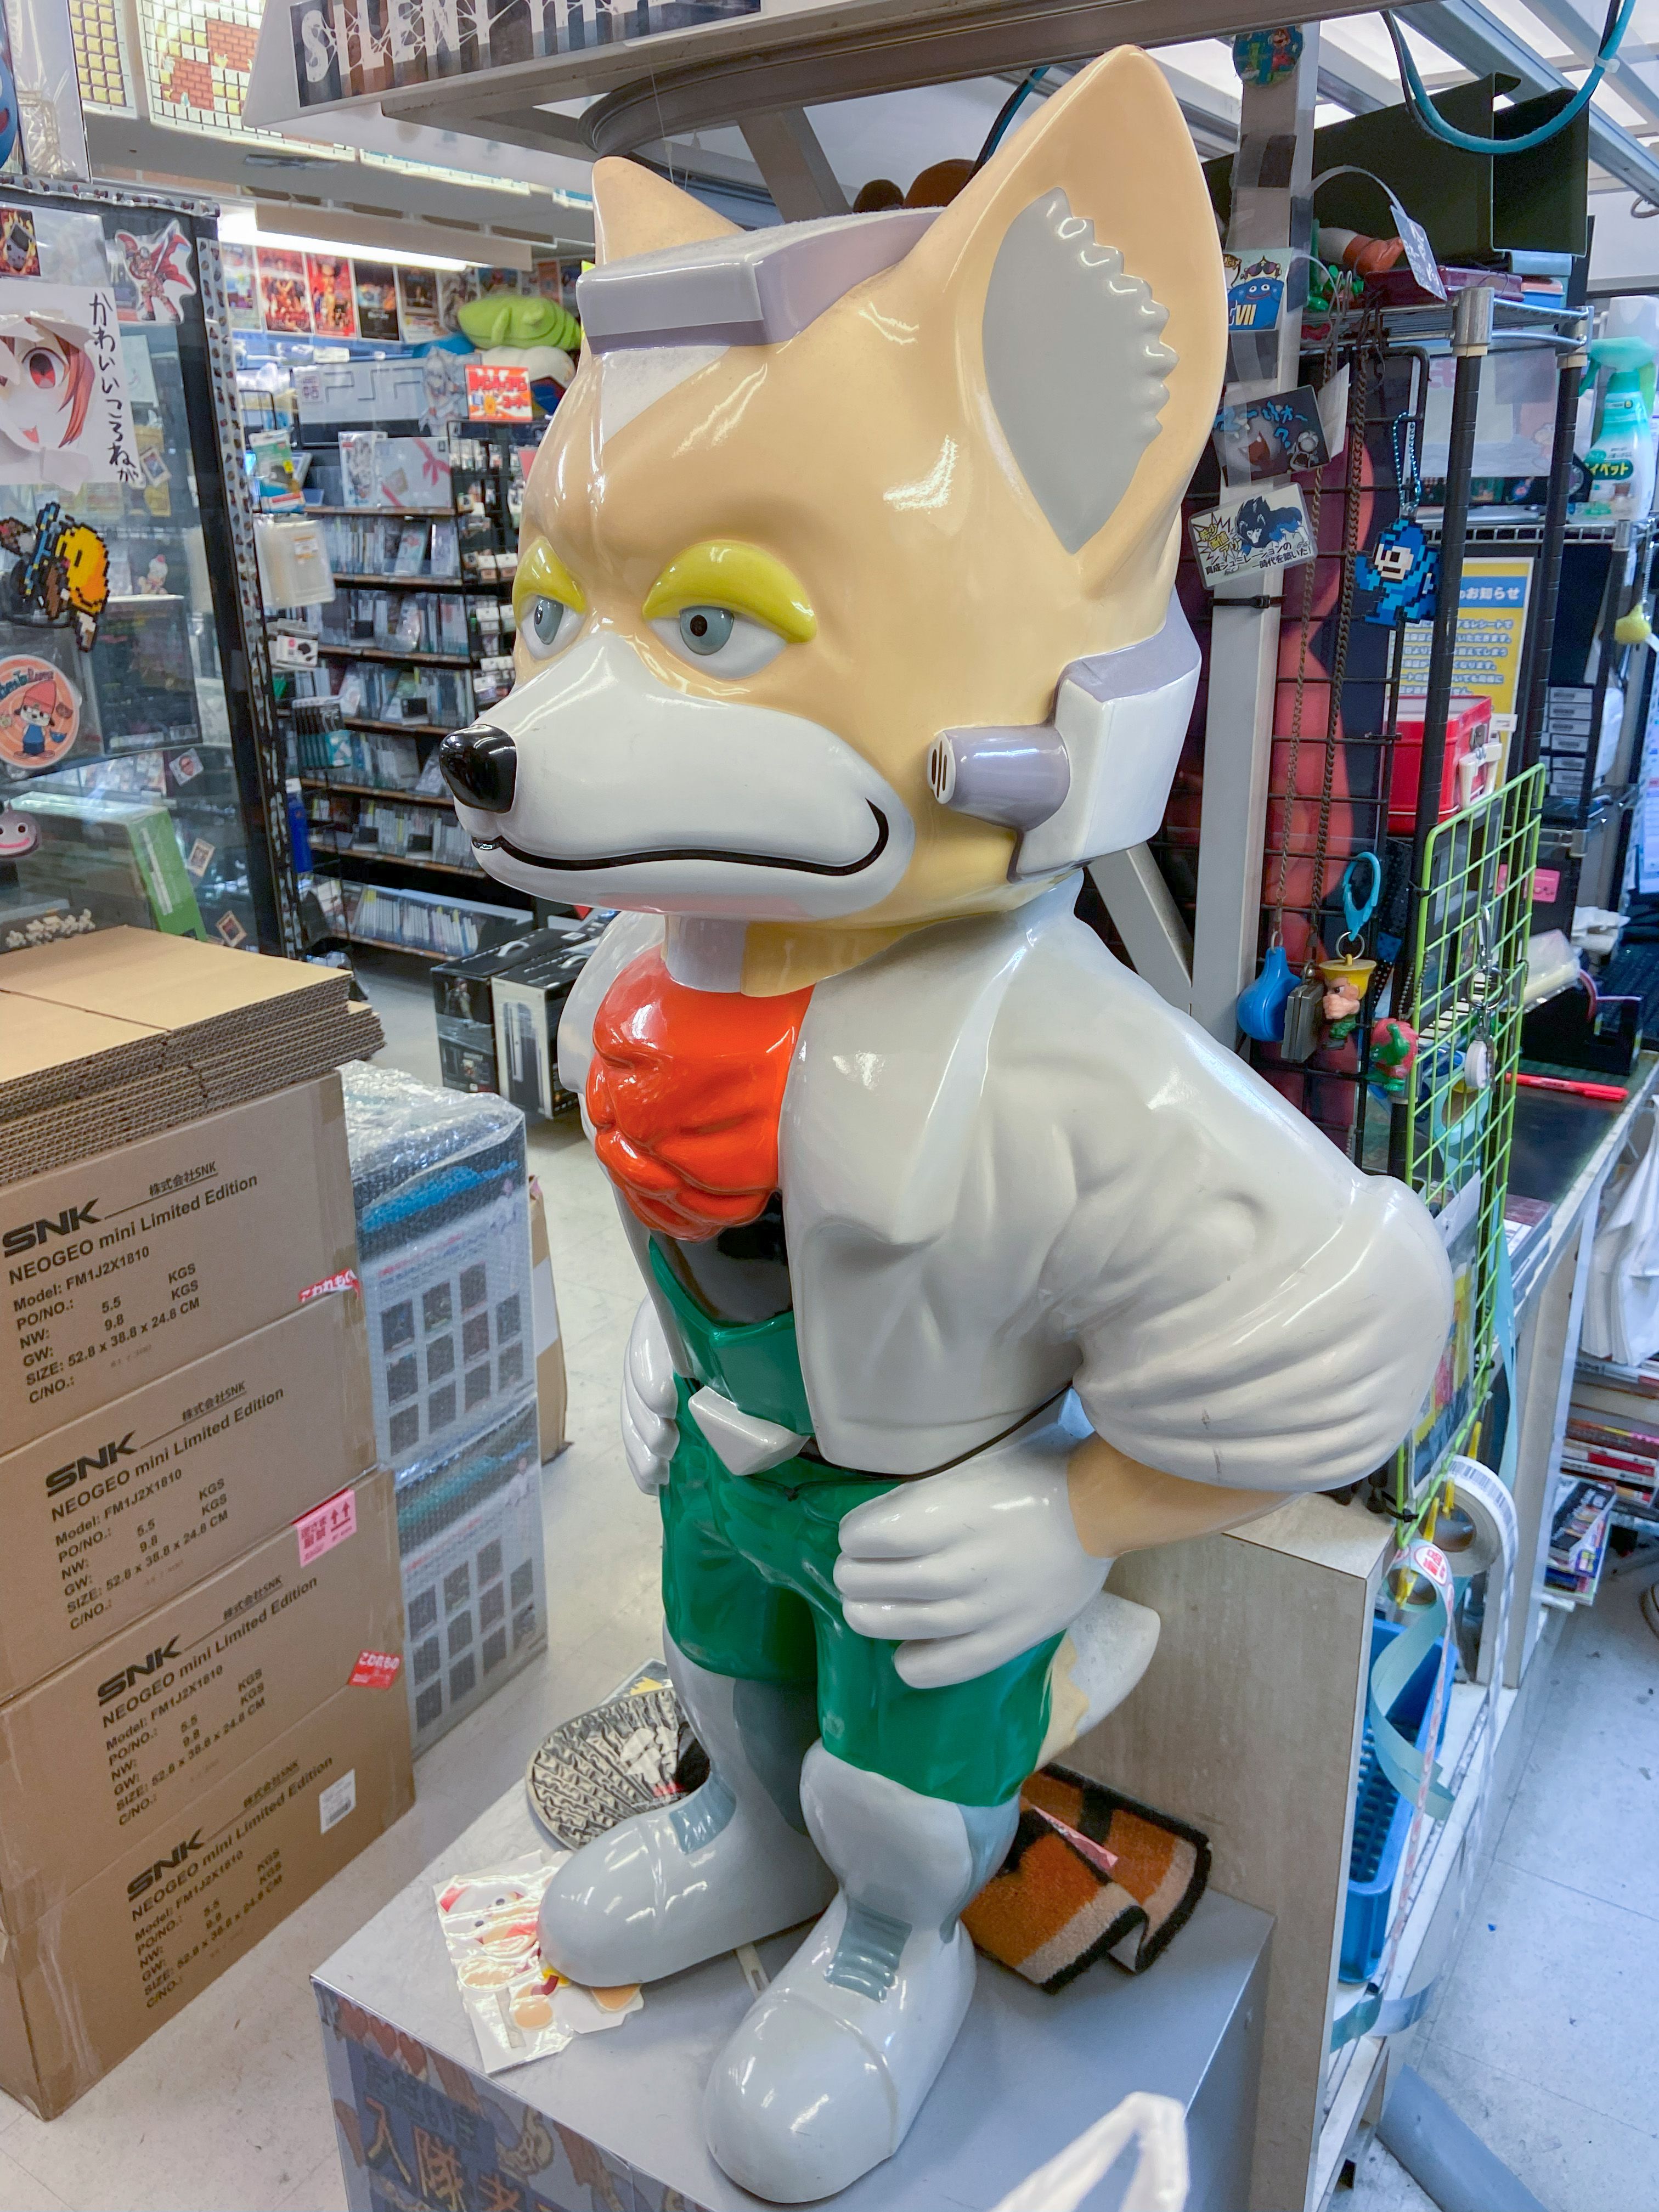 A statue of Fox McCloud from Star Fox 64